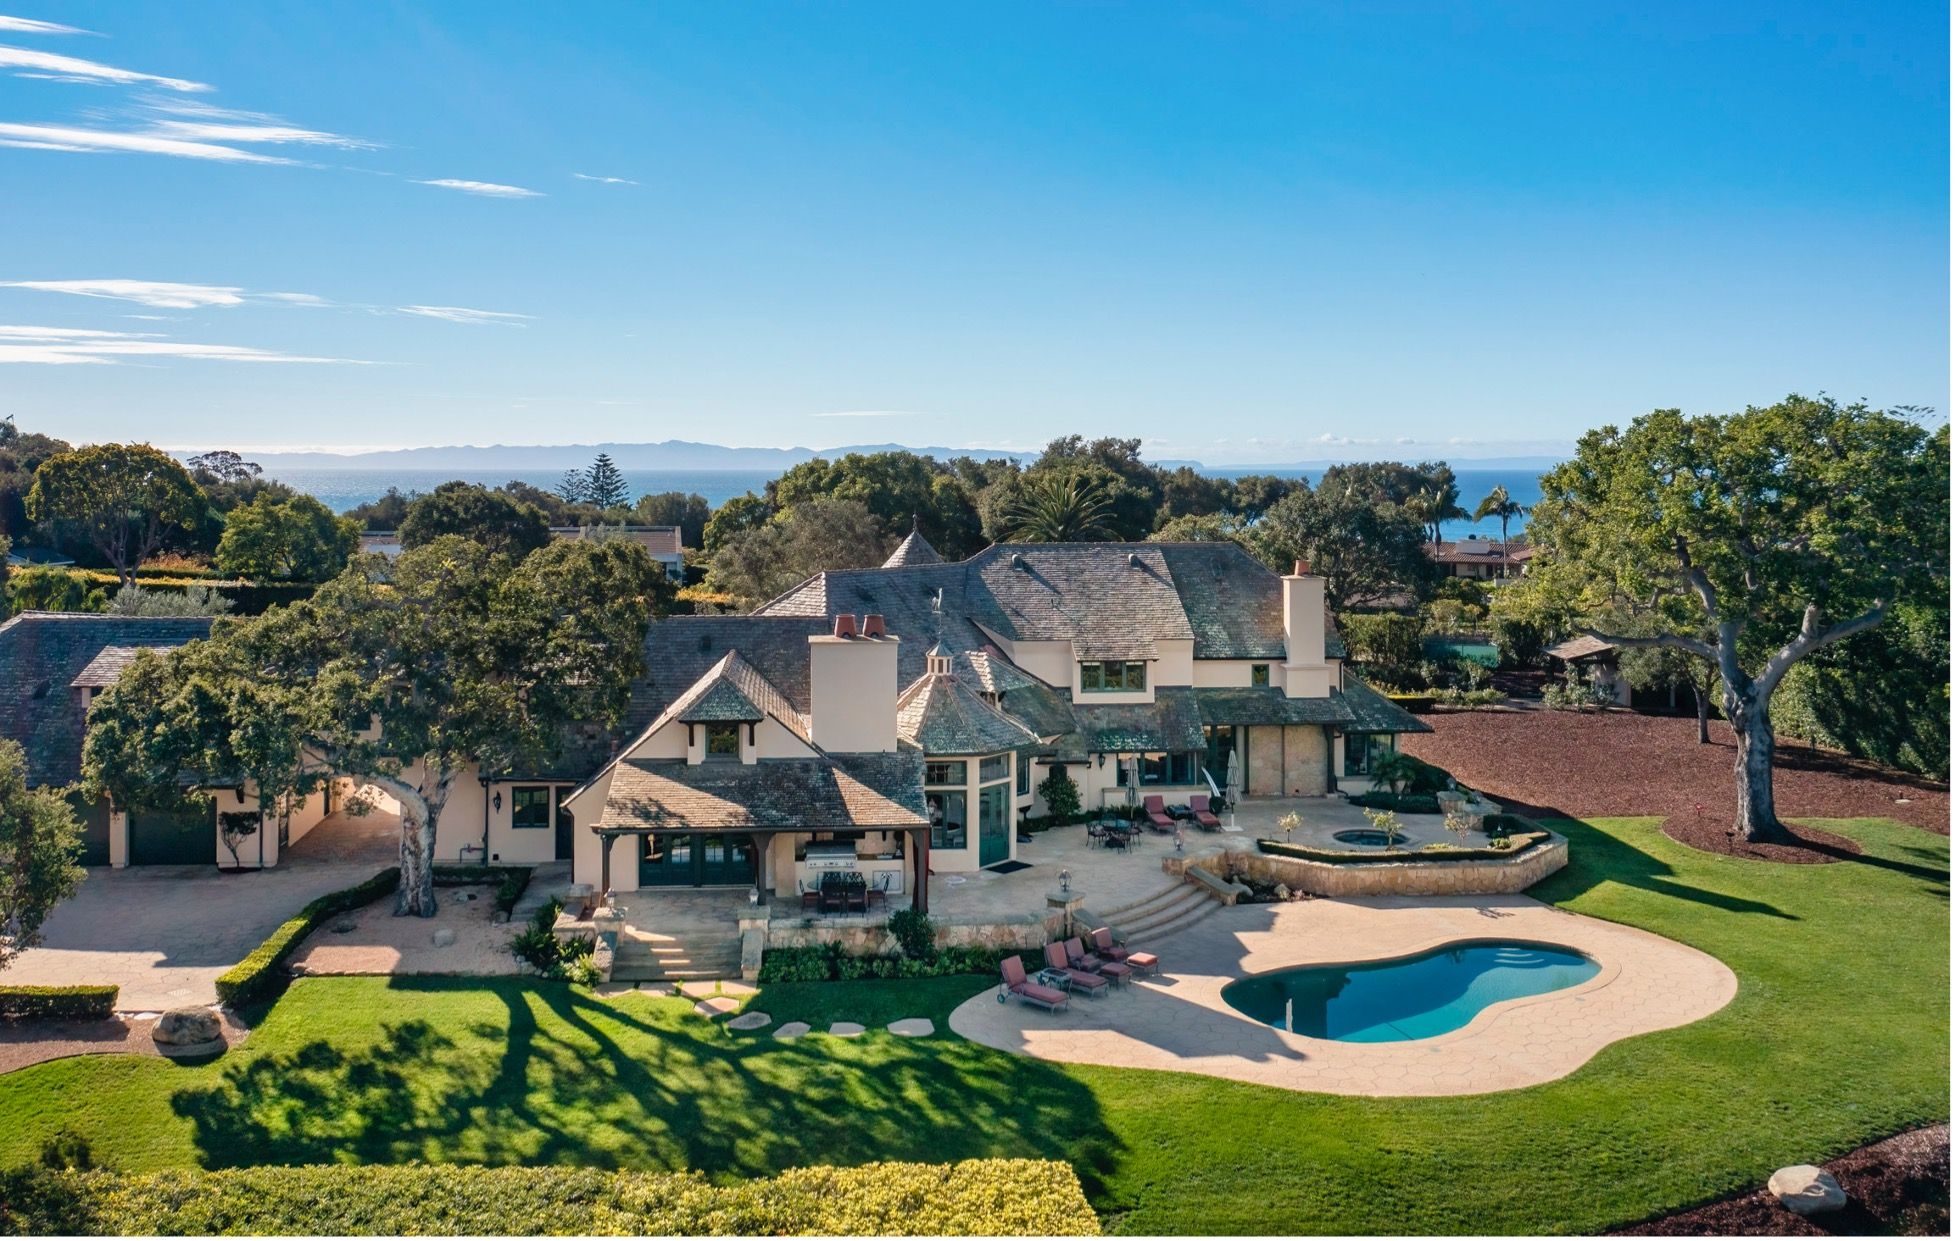 A French Country estate in Hope Ranch, with a kidney shaped pool surrounded by green grass and beautiful landscaping in the foreground and the large home in the background and blue sky above